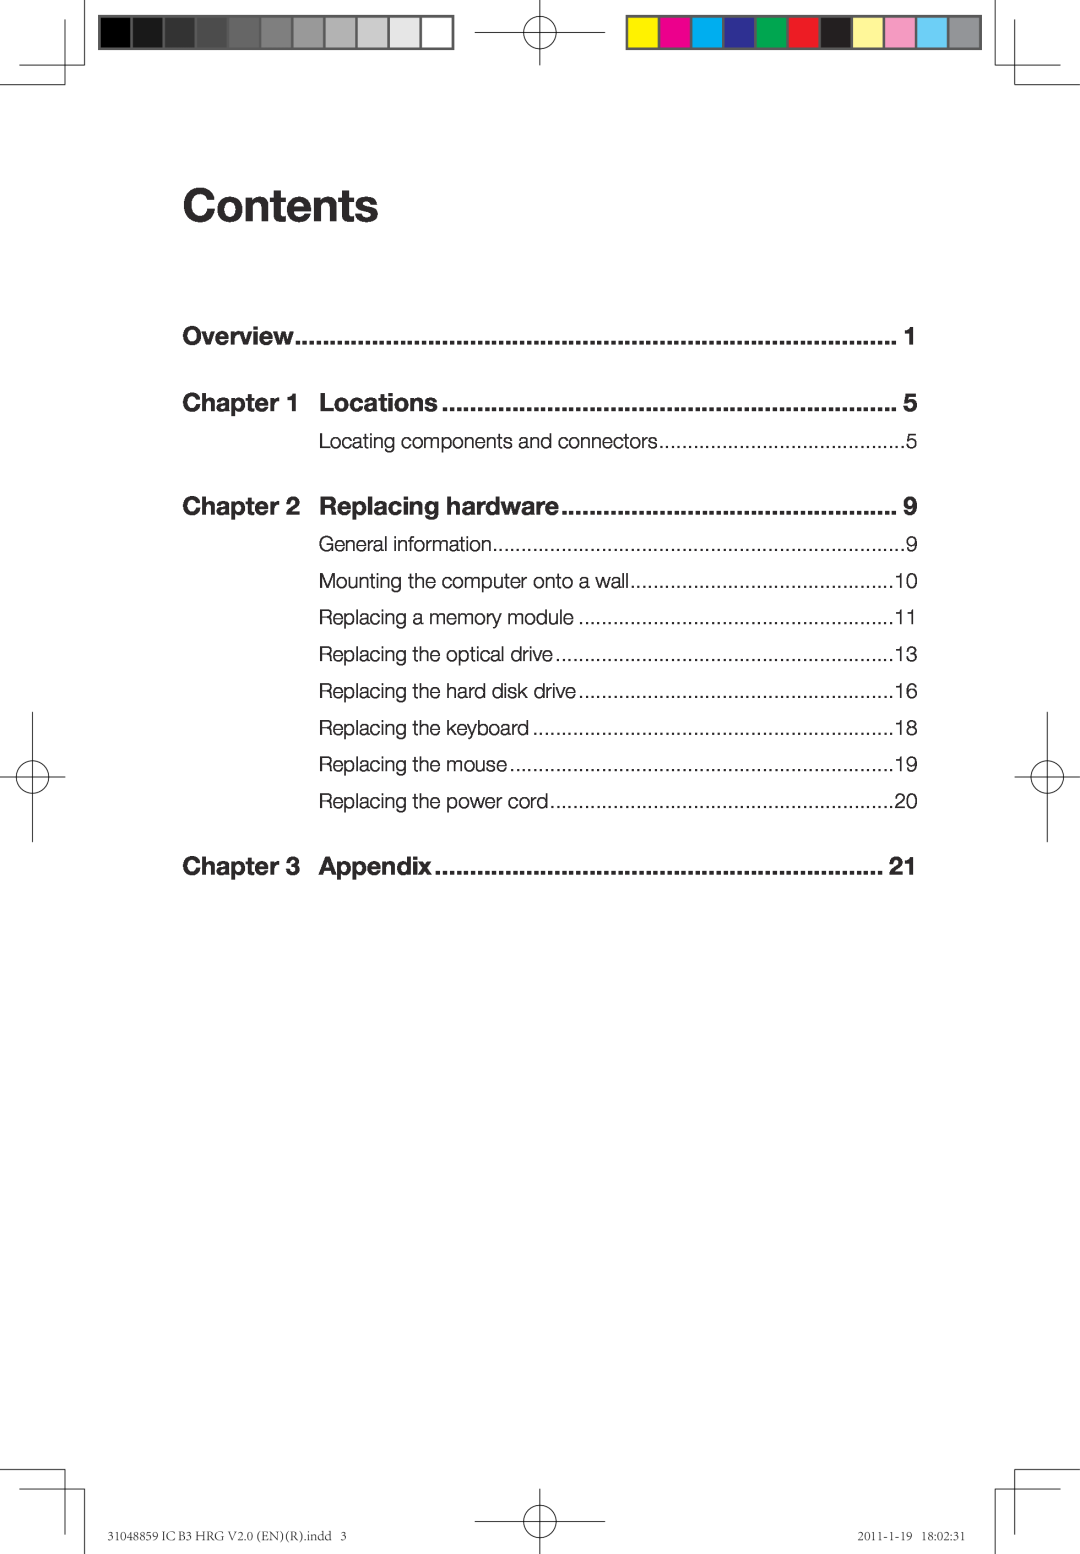 Lenovo manual Contents, Chapter, Appendix, Locations, Replacing hardware, Overview, IC B3 HRG V2.0 ENR.indd, 2011-1-19 